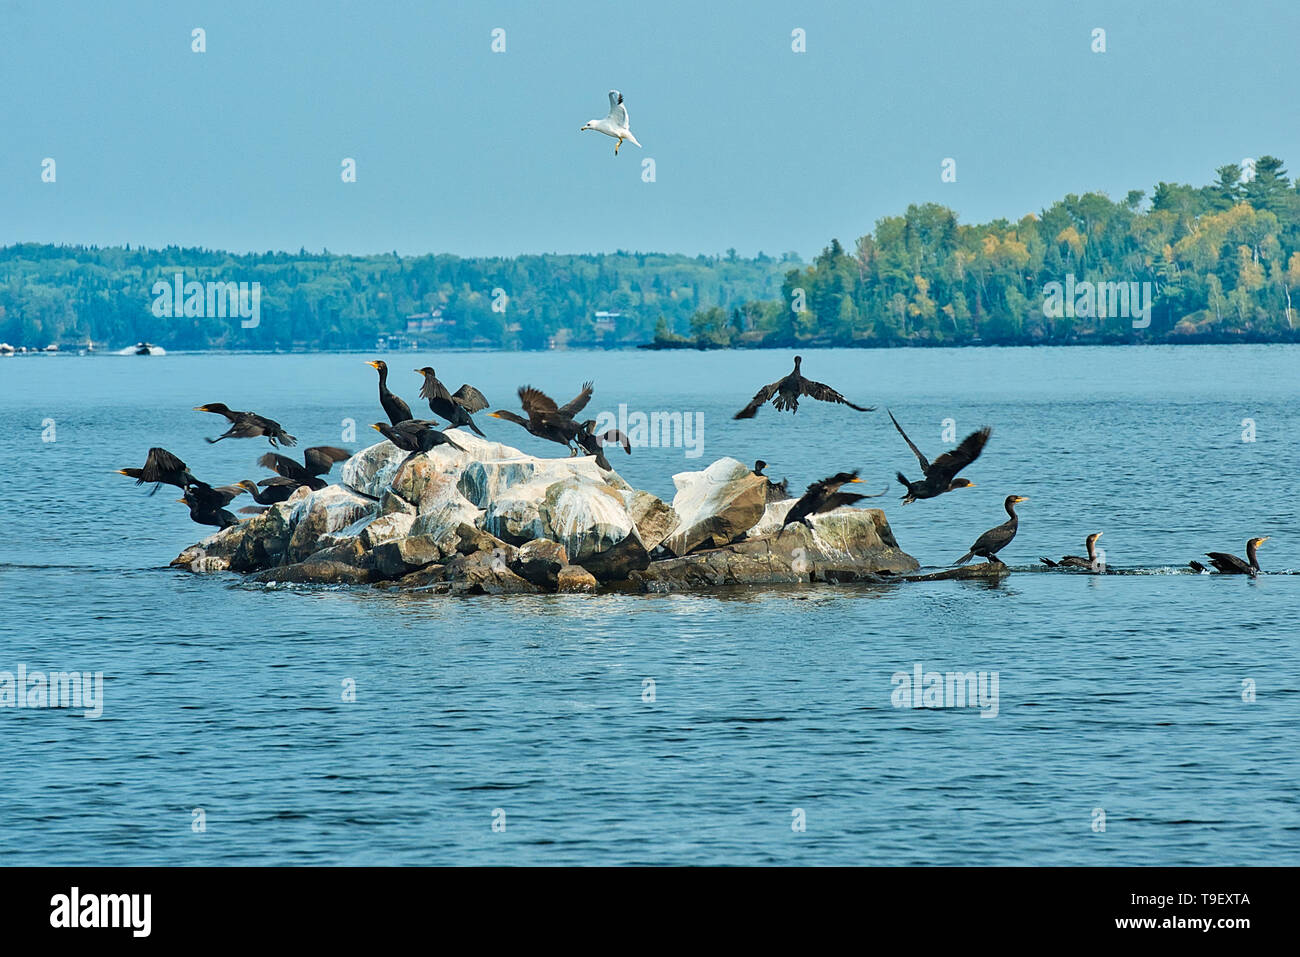 Double-crested cormorant (Phalacrocorax auritus) on an island in the Lake of the Woods, Ontario, Canada Stock Photo